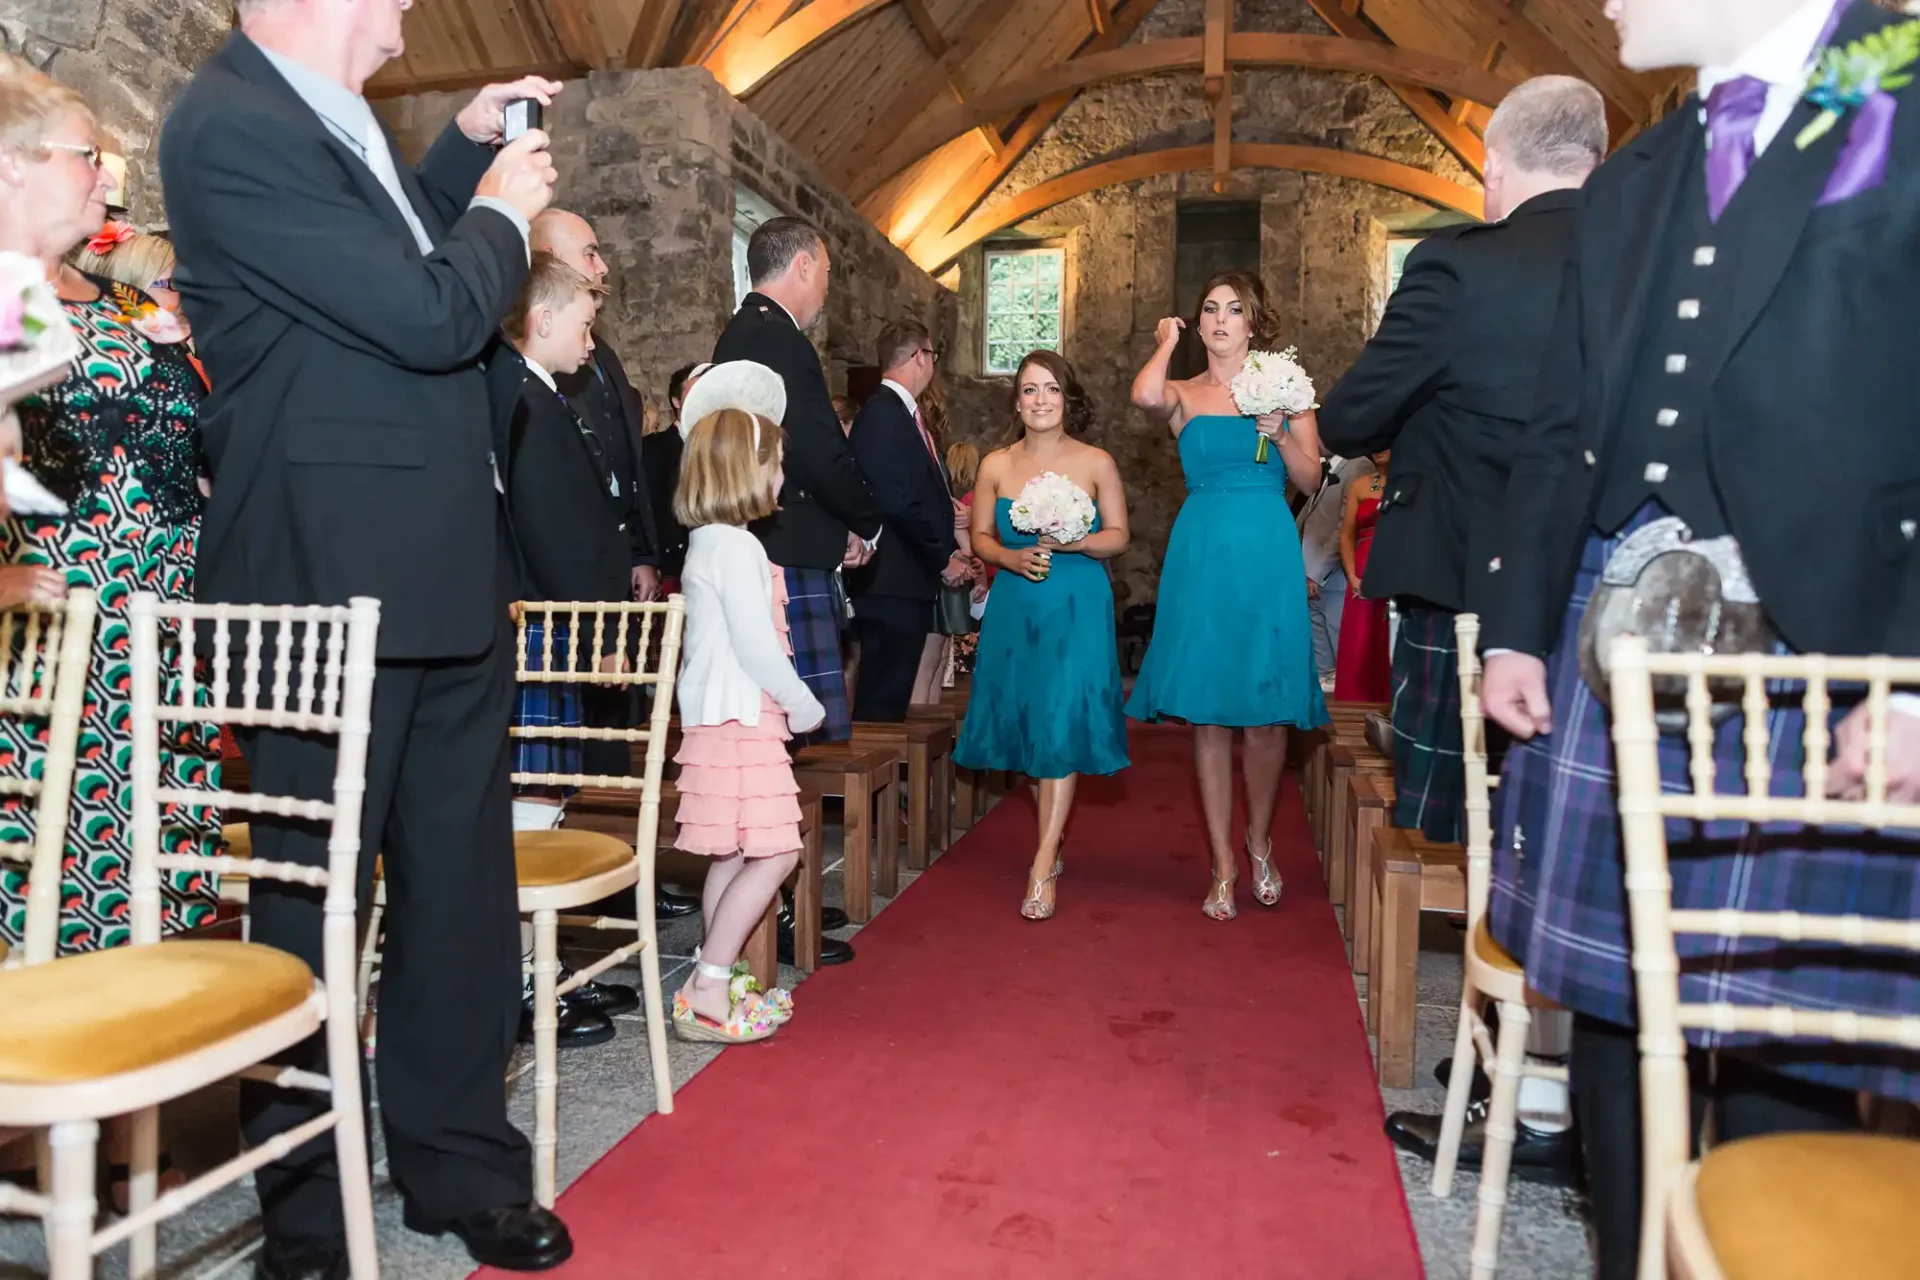 Two women in teal dresses smiling and walking down a red carpet in a stone chapel, surrounded by guests during a wedding ceremony.